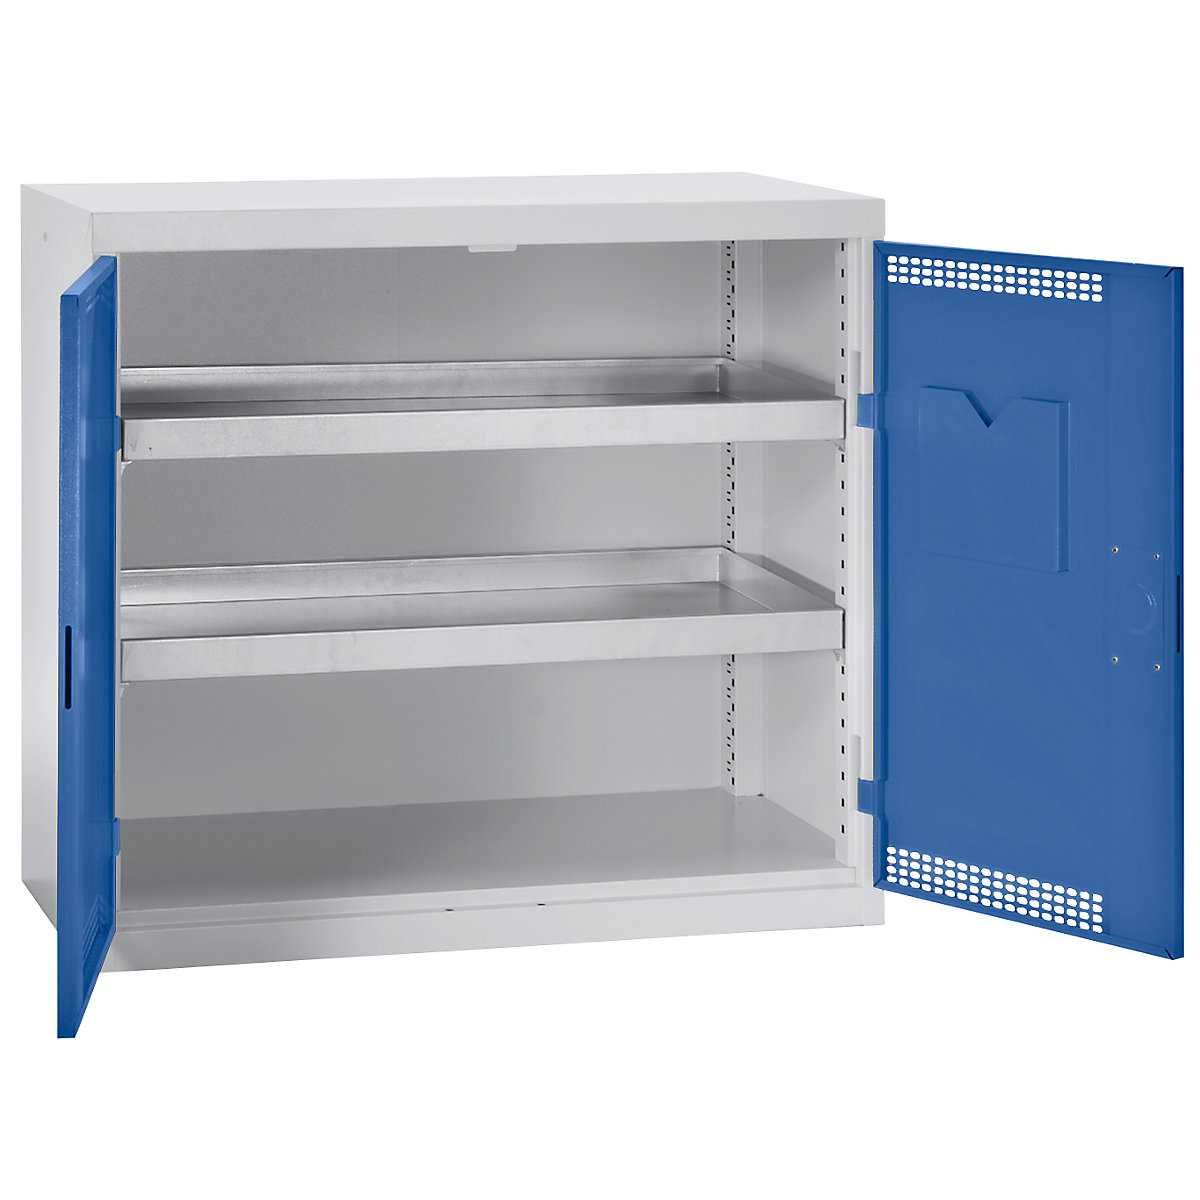 Environmental cupboard with door perforations, HxWxD 900 x 1000 x 500 mm, 2 tray shelves, light grey / gentian blue-5